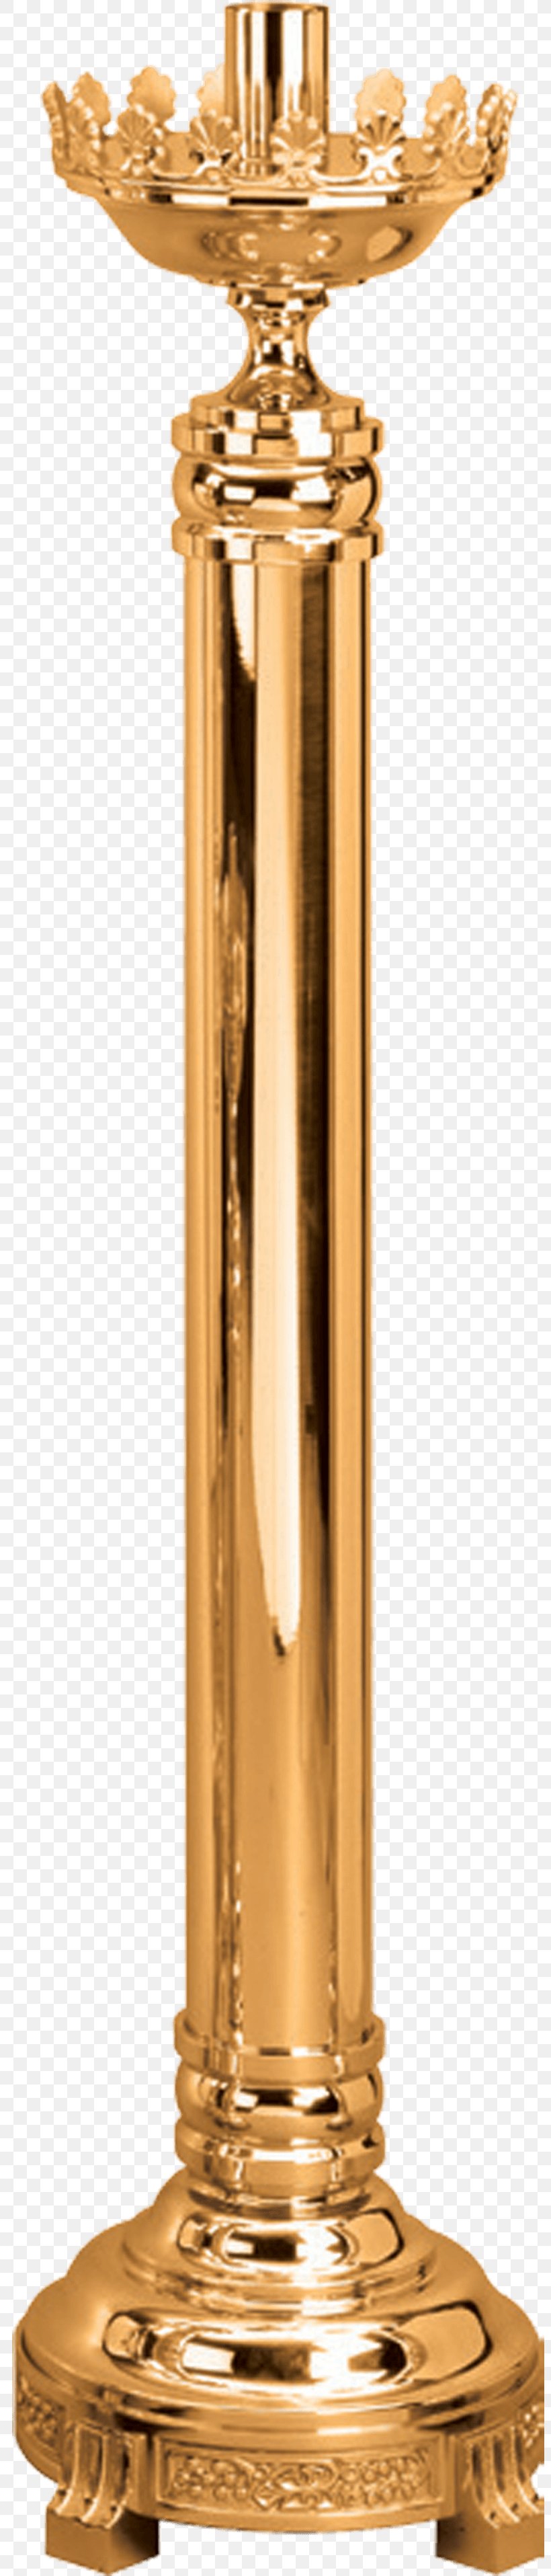 01504 Gold Trophy, PNG, 800x3831px, Gold, Brass, Metal, Trophy Download Free